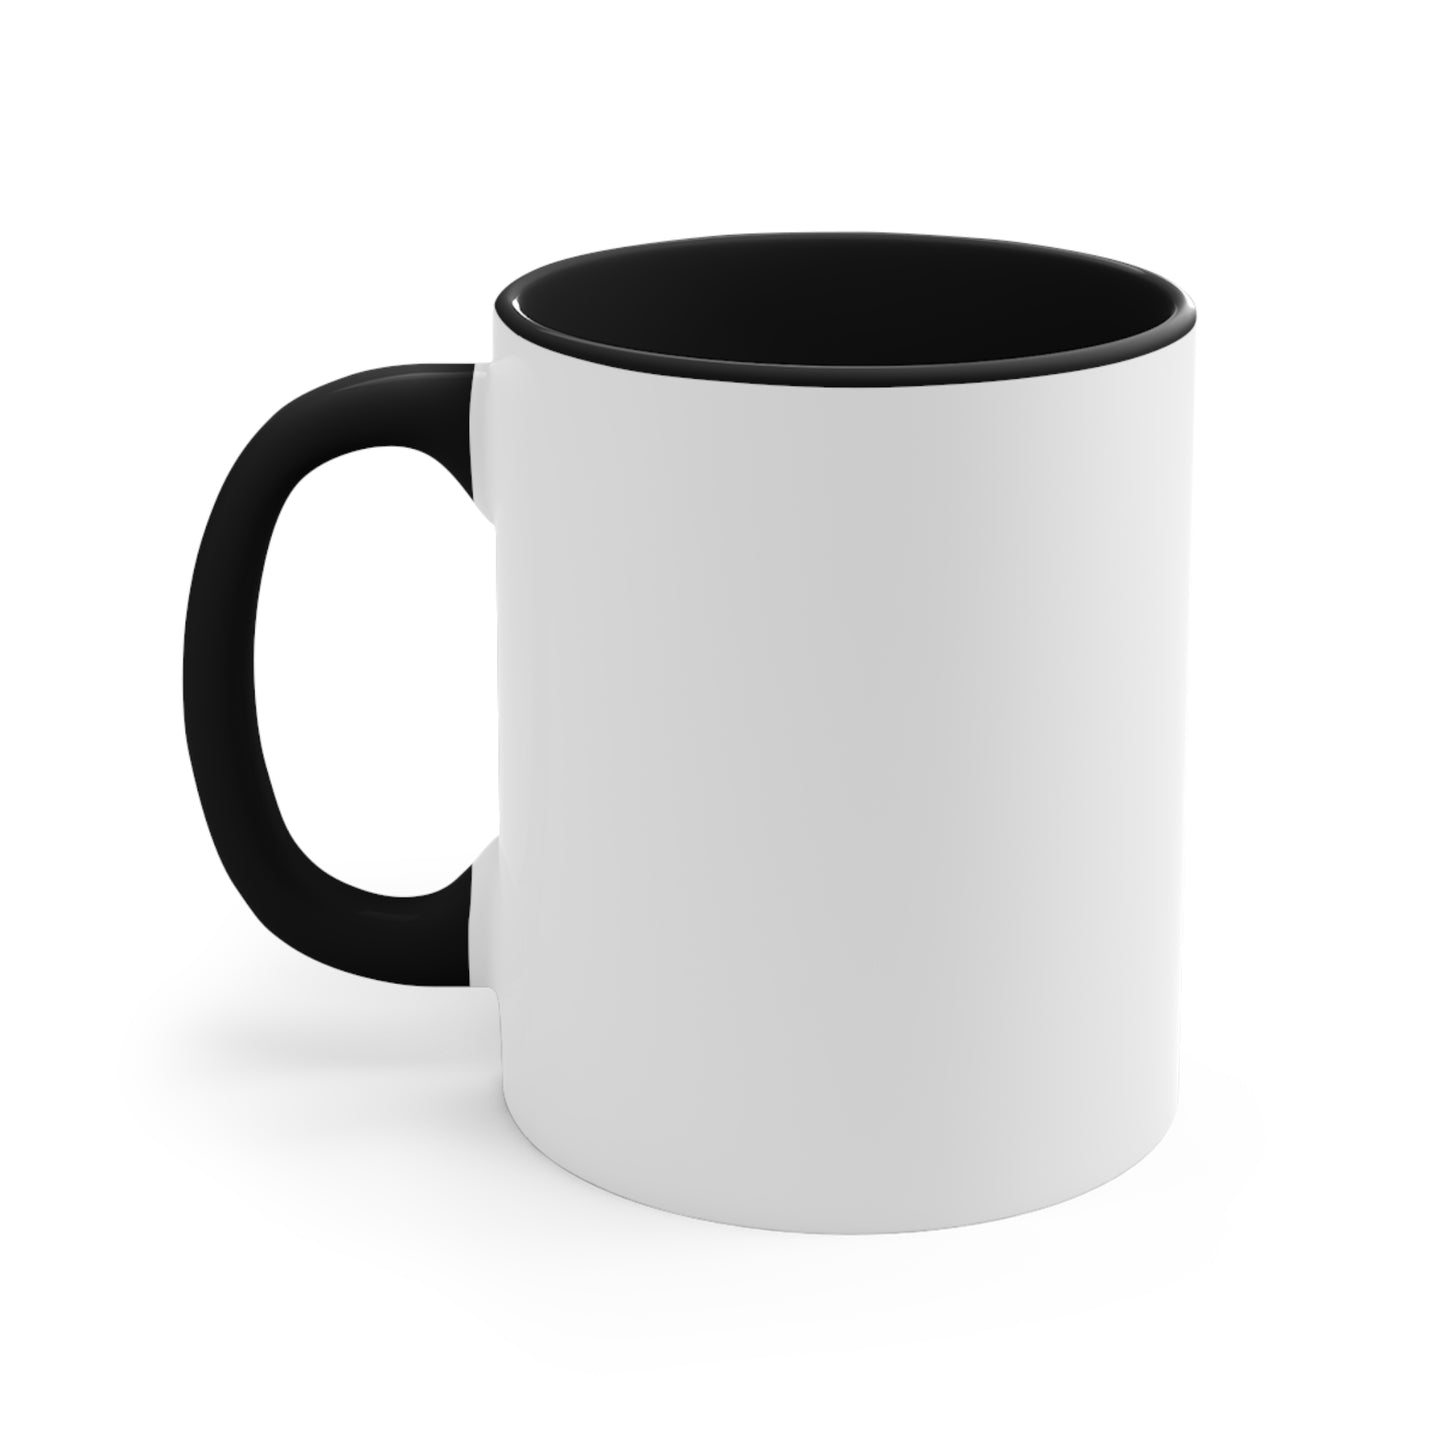 Leaders of Color Accent Mug